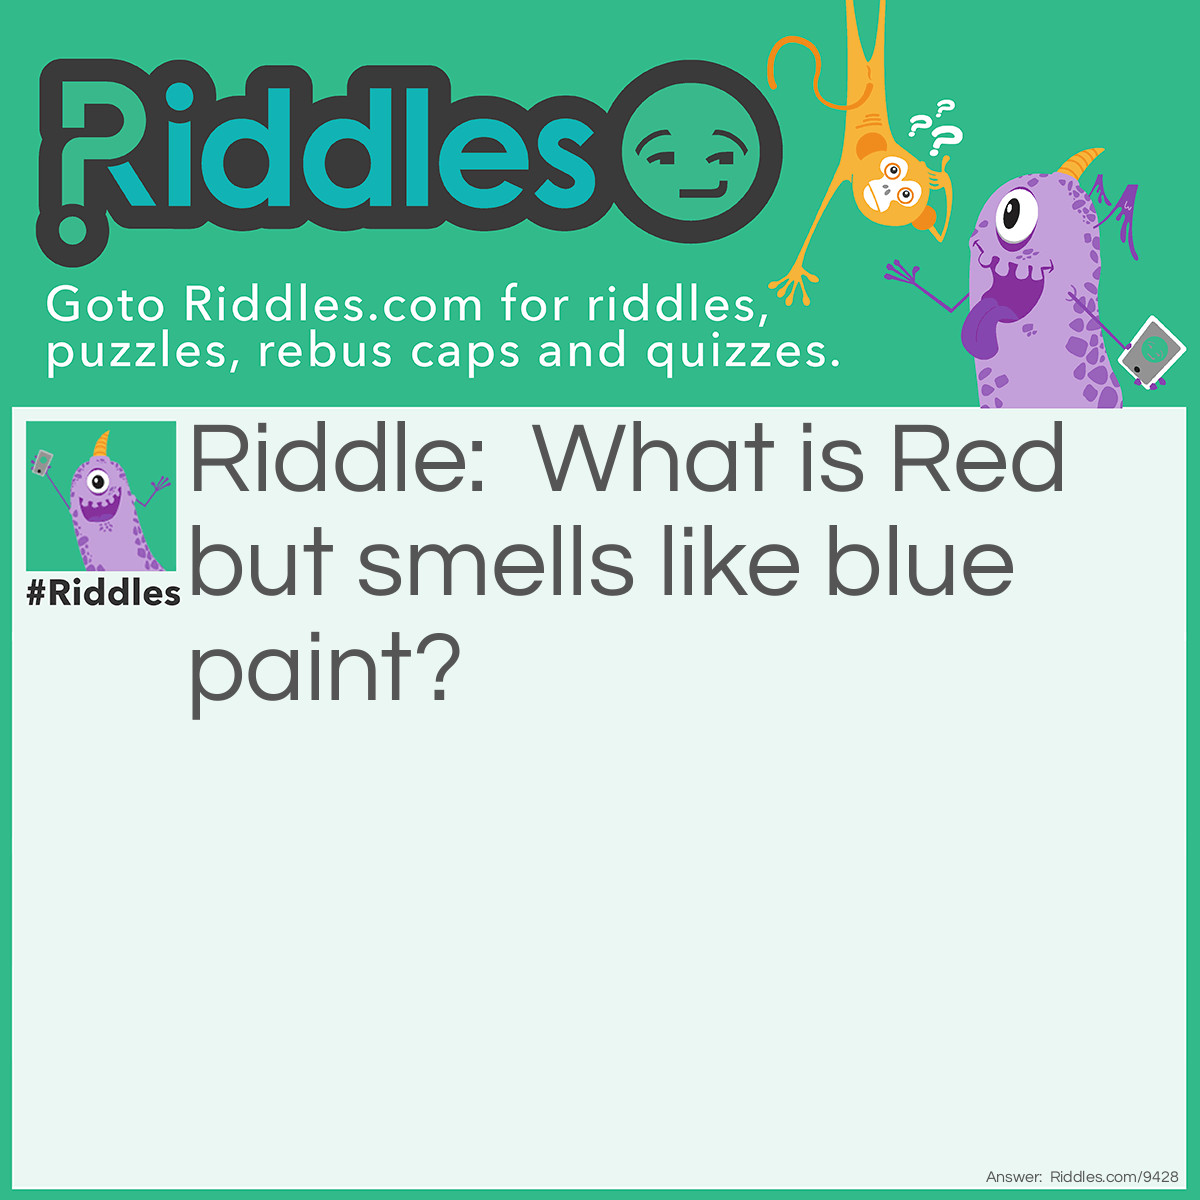 Riddle: What is Red but smells like blue paint? Answer: Blue Paint.